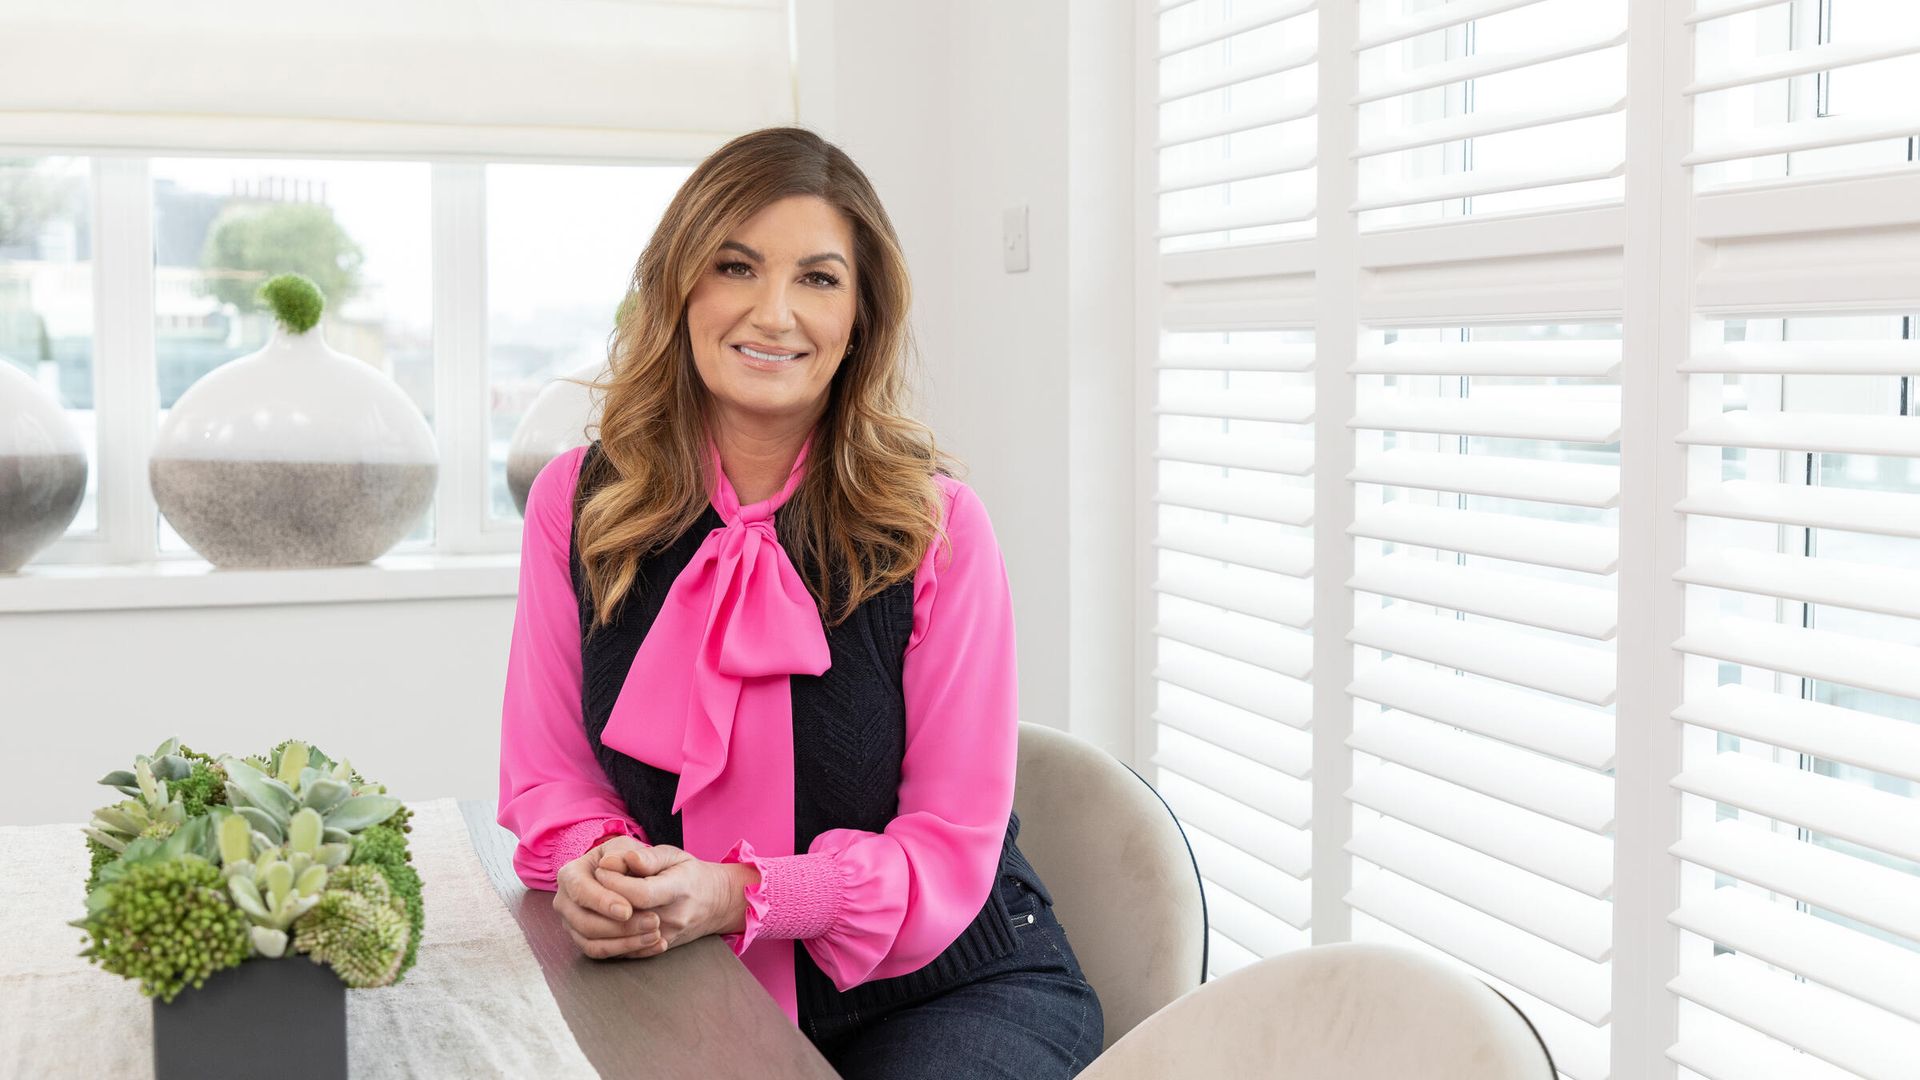 Karren Brady became a grandmother for the first time in March 